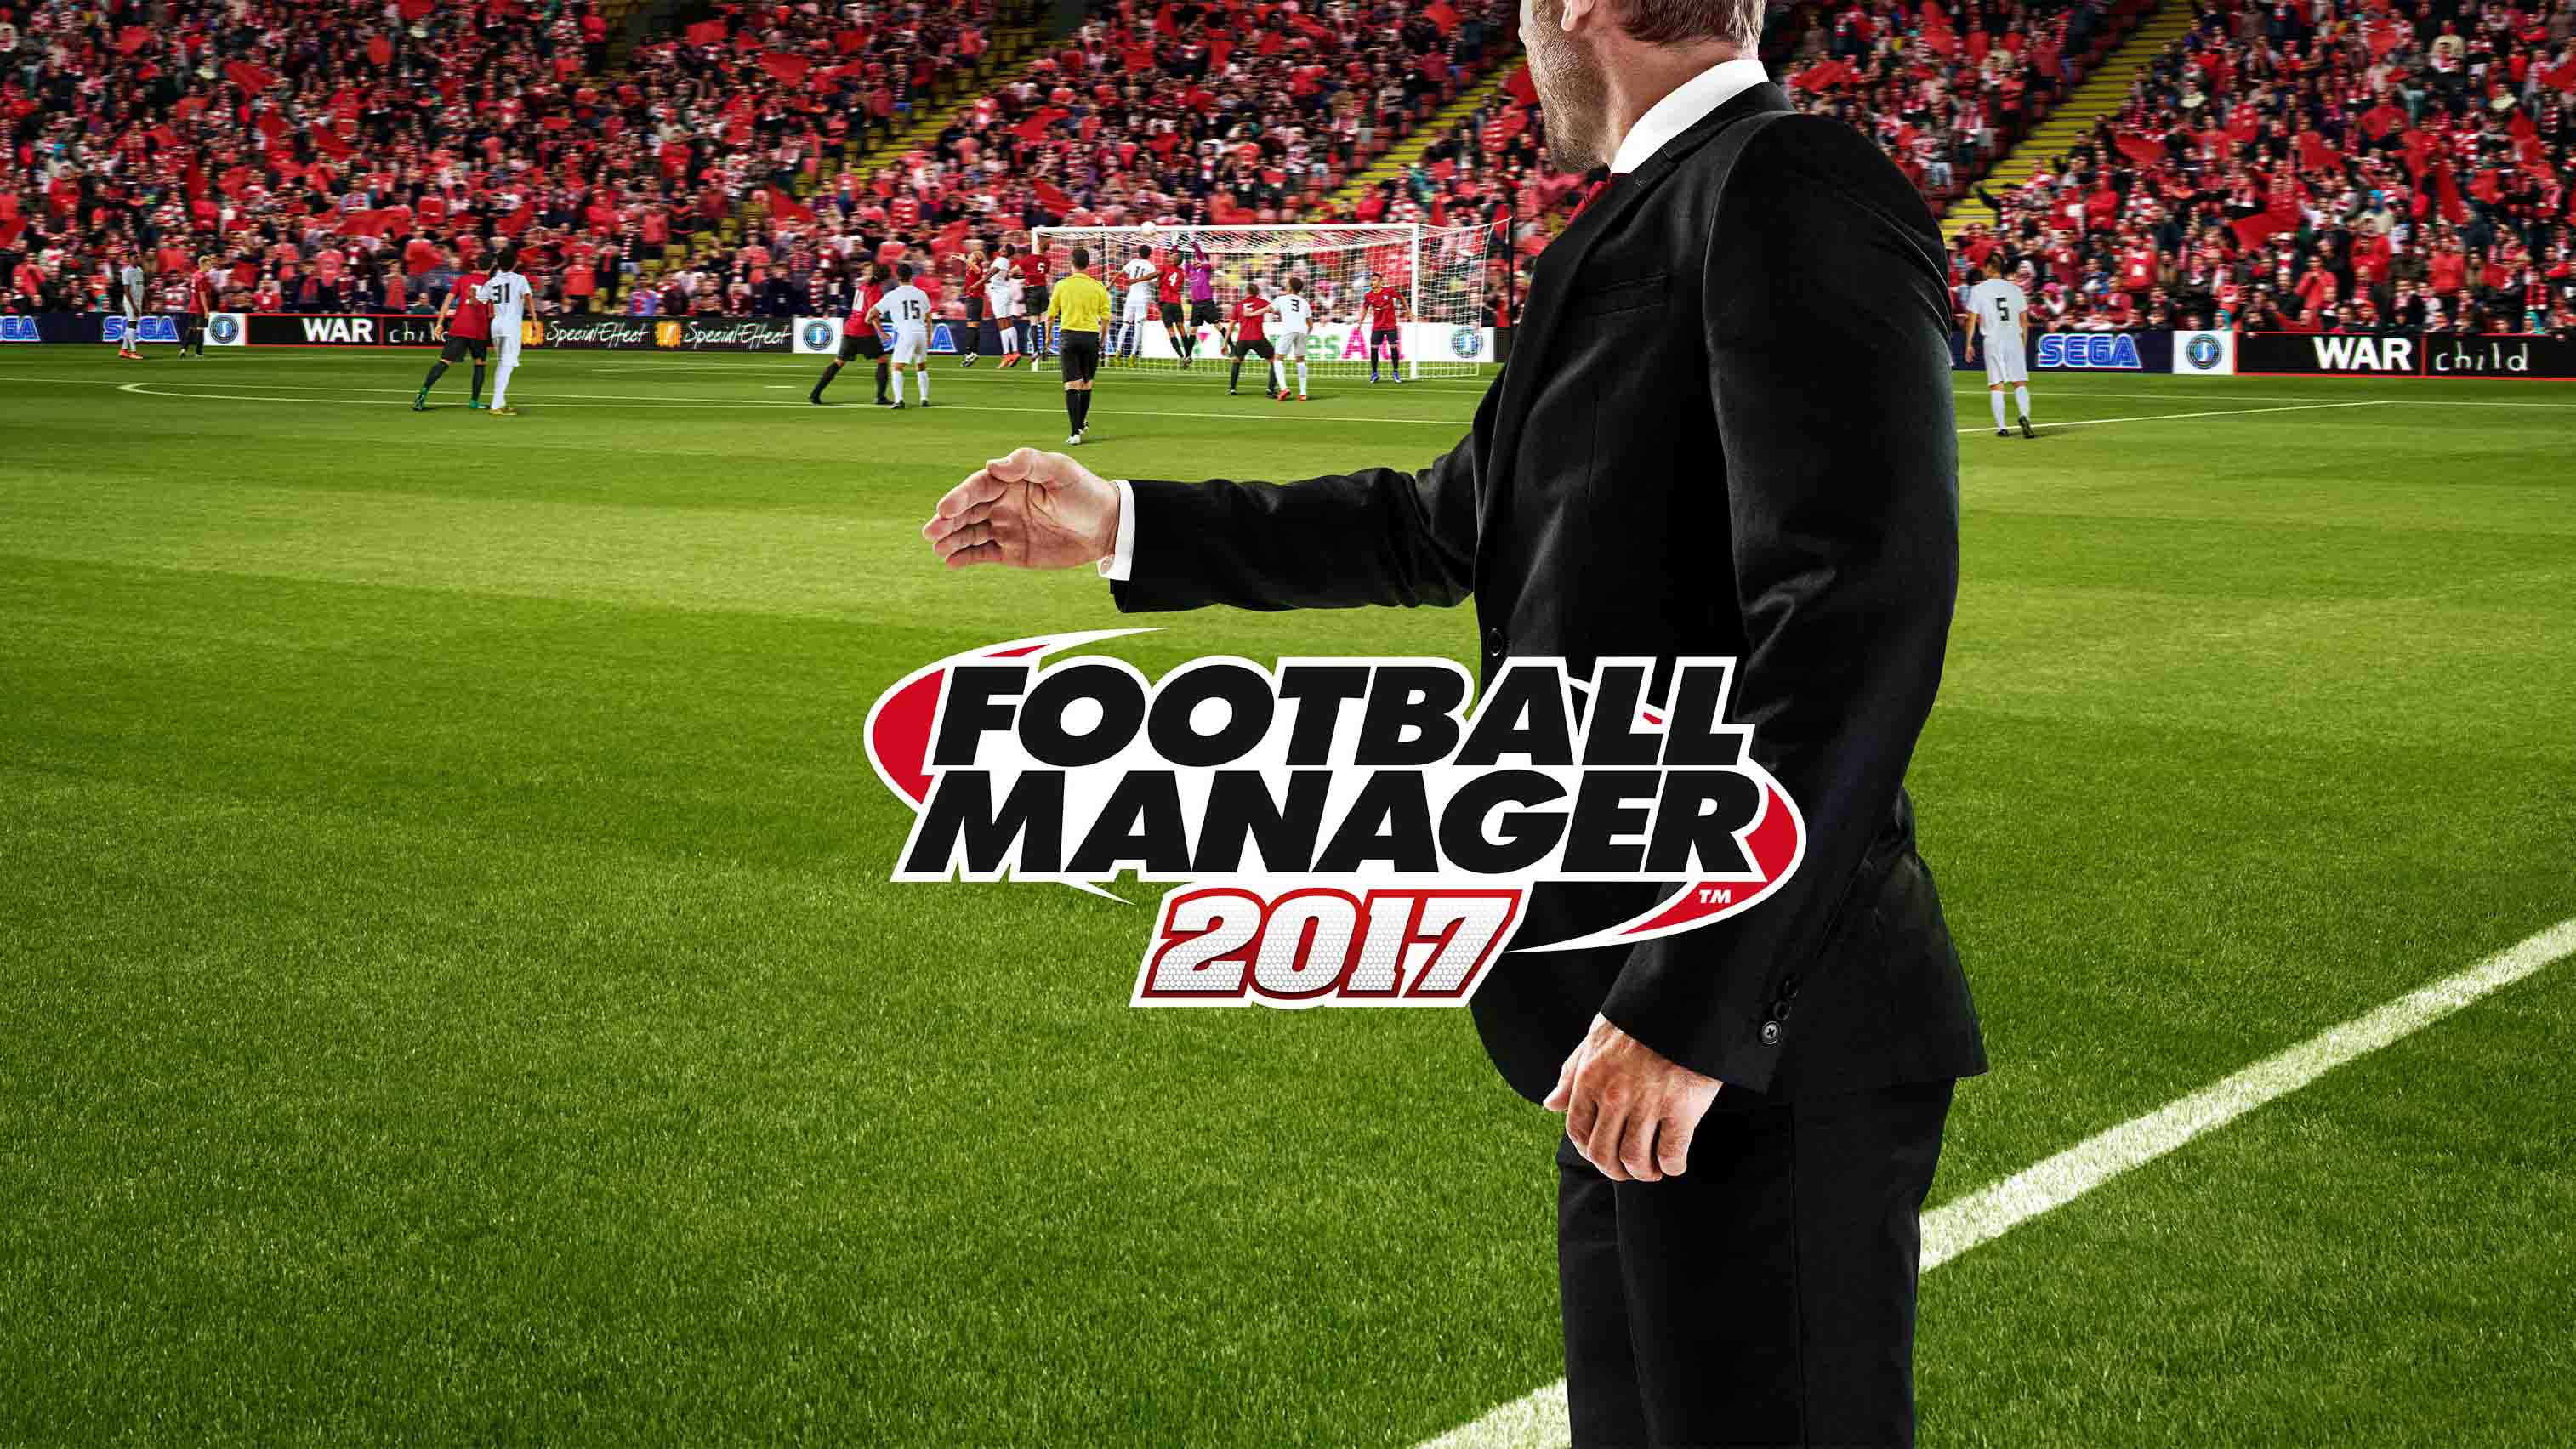 Football Manager 2017 + Football Manager Touch 2017 + FM Editor v17.3.1 + 17 DLCs